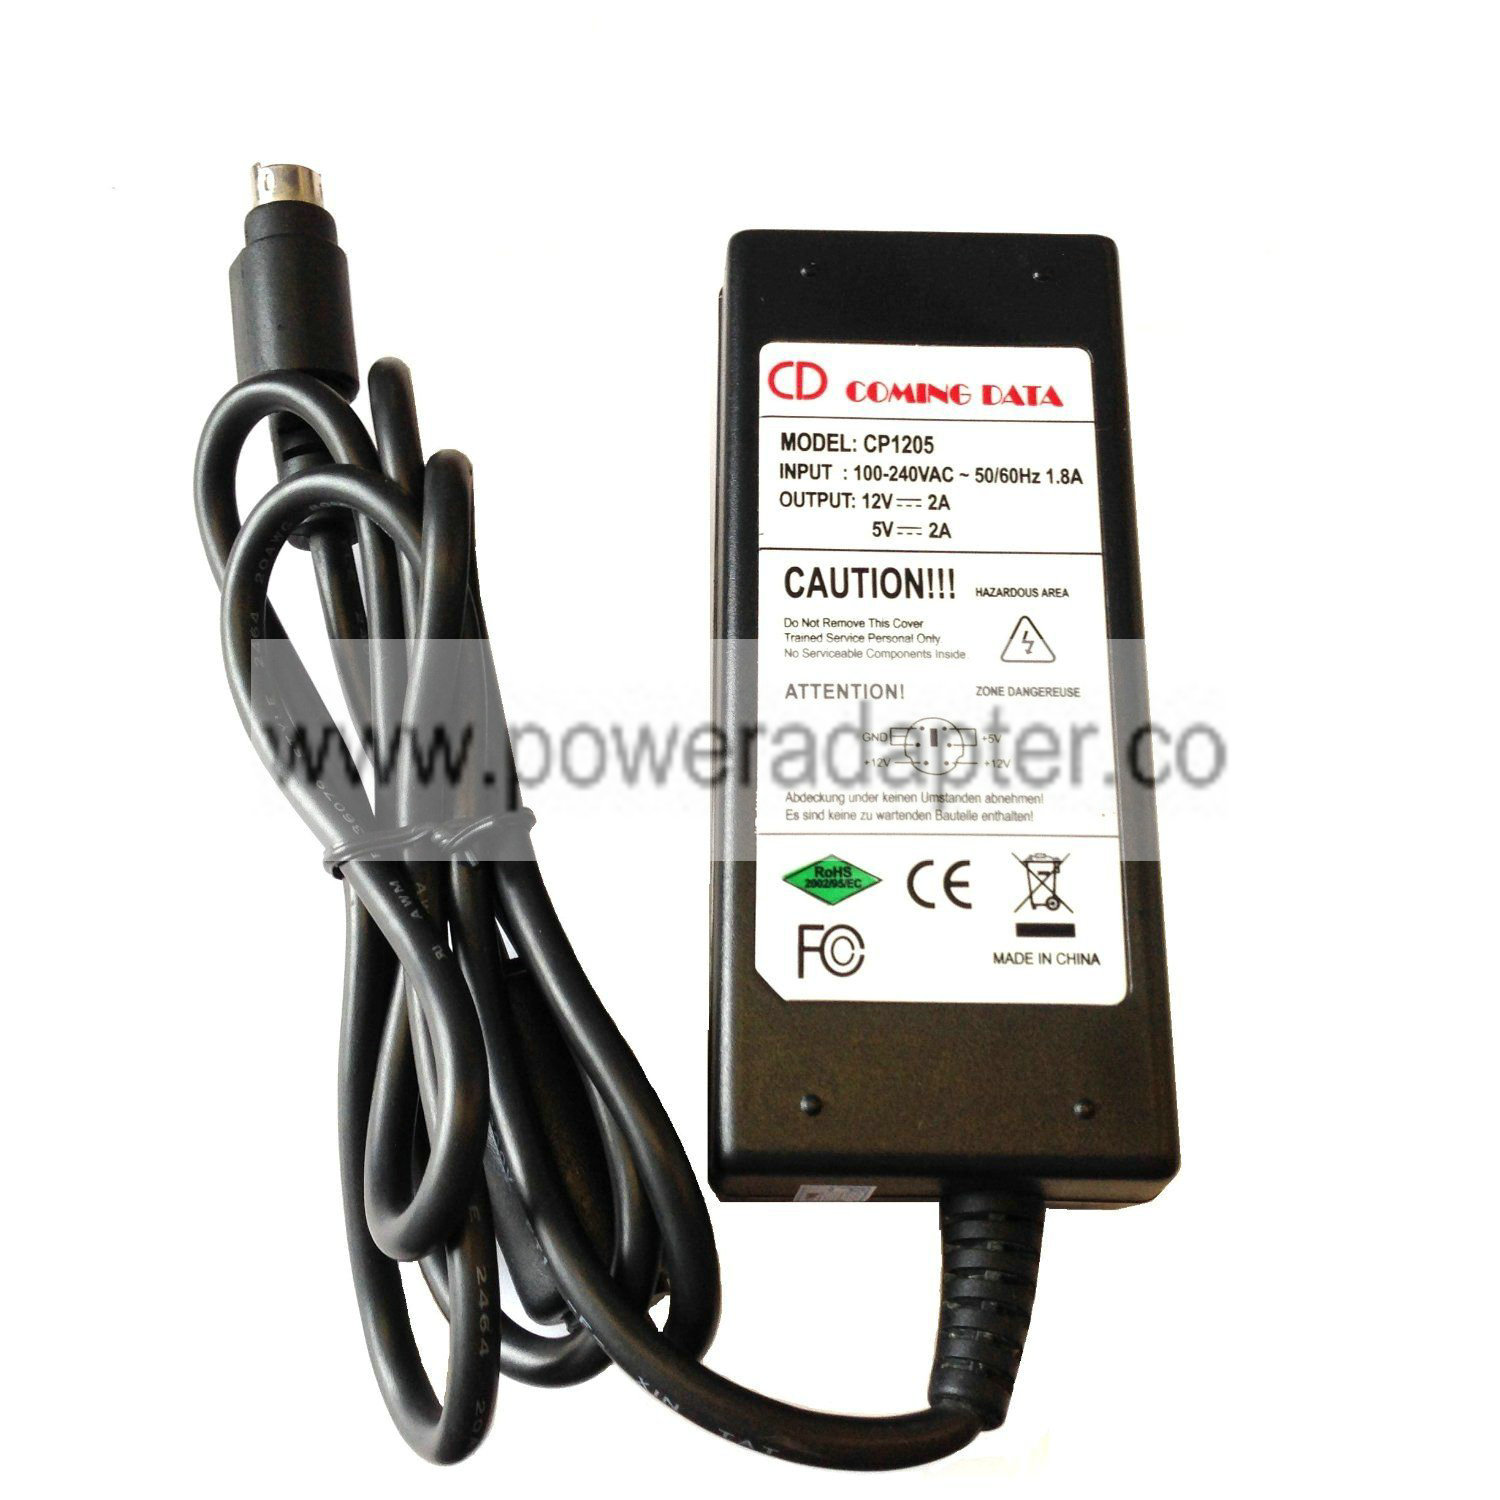 GENUINE ORIGINAL COMING DATA CP1205 POWER SUPPLY ADAPTER 12V 2A 5V 2A 6 PIN DIN WE ARE PROFESSIONAL SELLERS AND PROVIDE